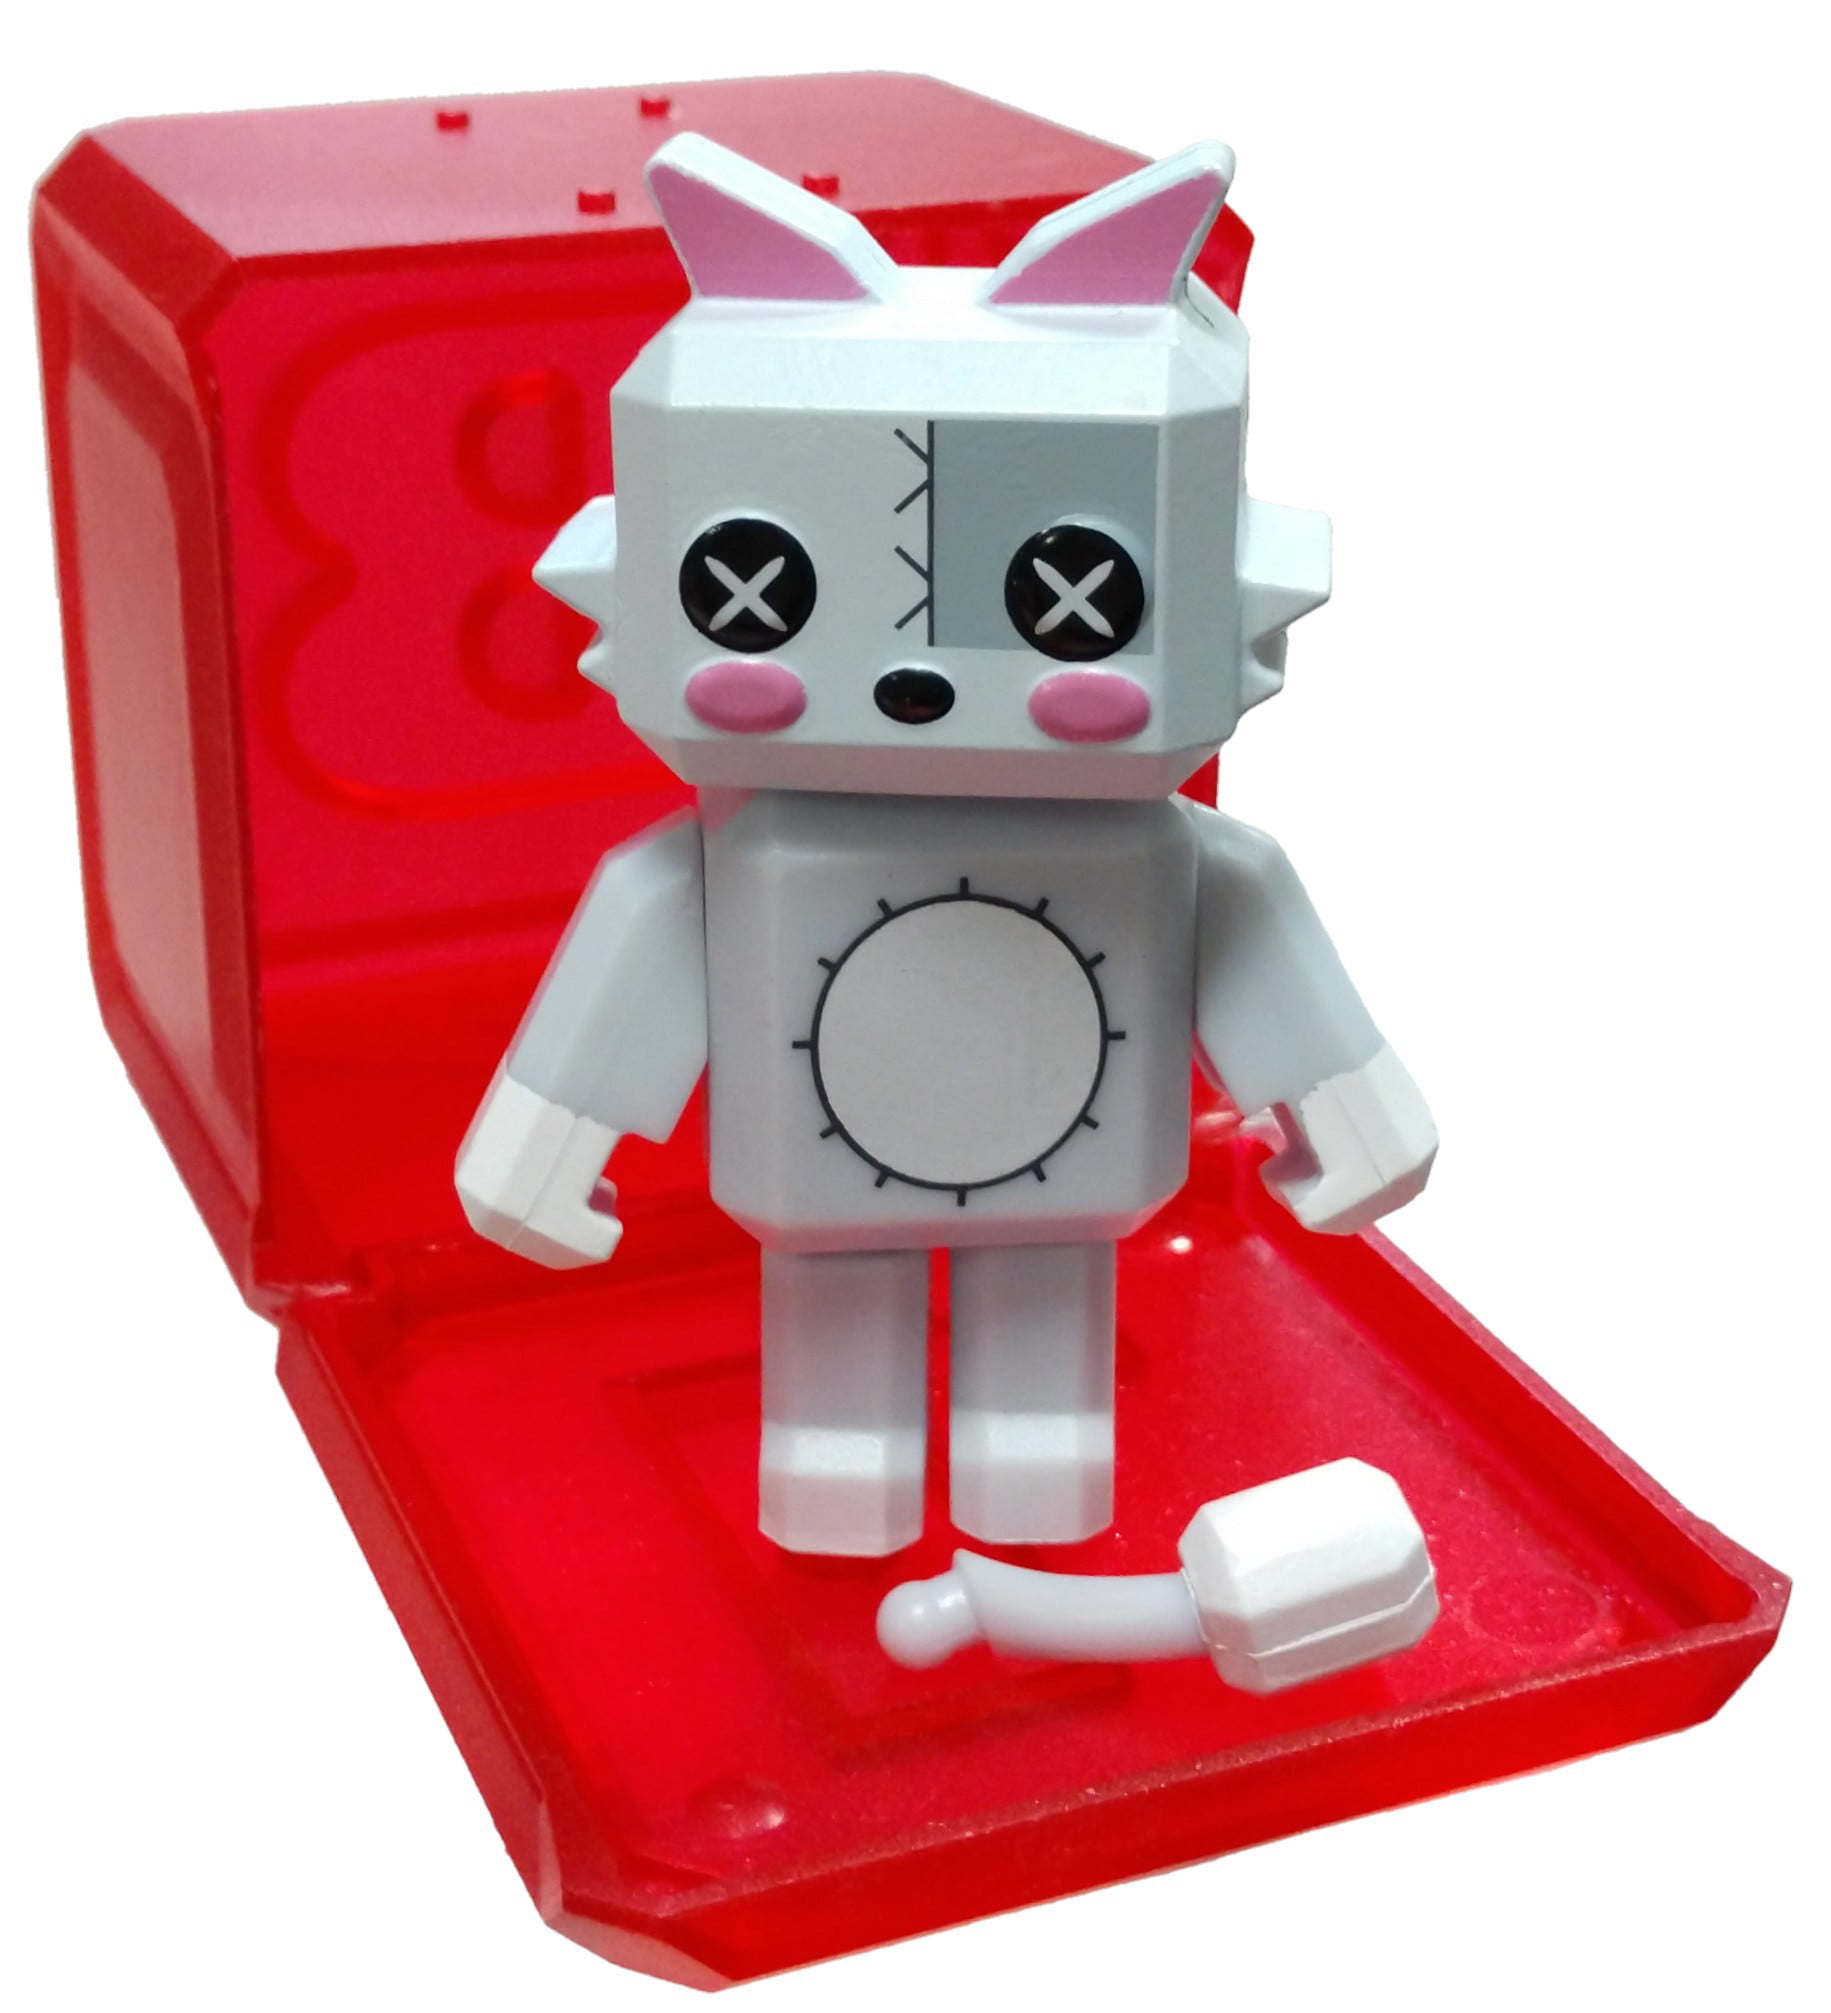 Roblox Celebrity Collection Series 5 Book Of Monsters Kittens Mini Figure With Red Cube And Online Code No Packaging Walmart Com Walmart Com - roblox red robe